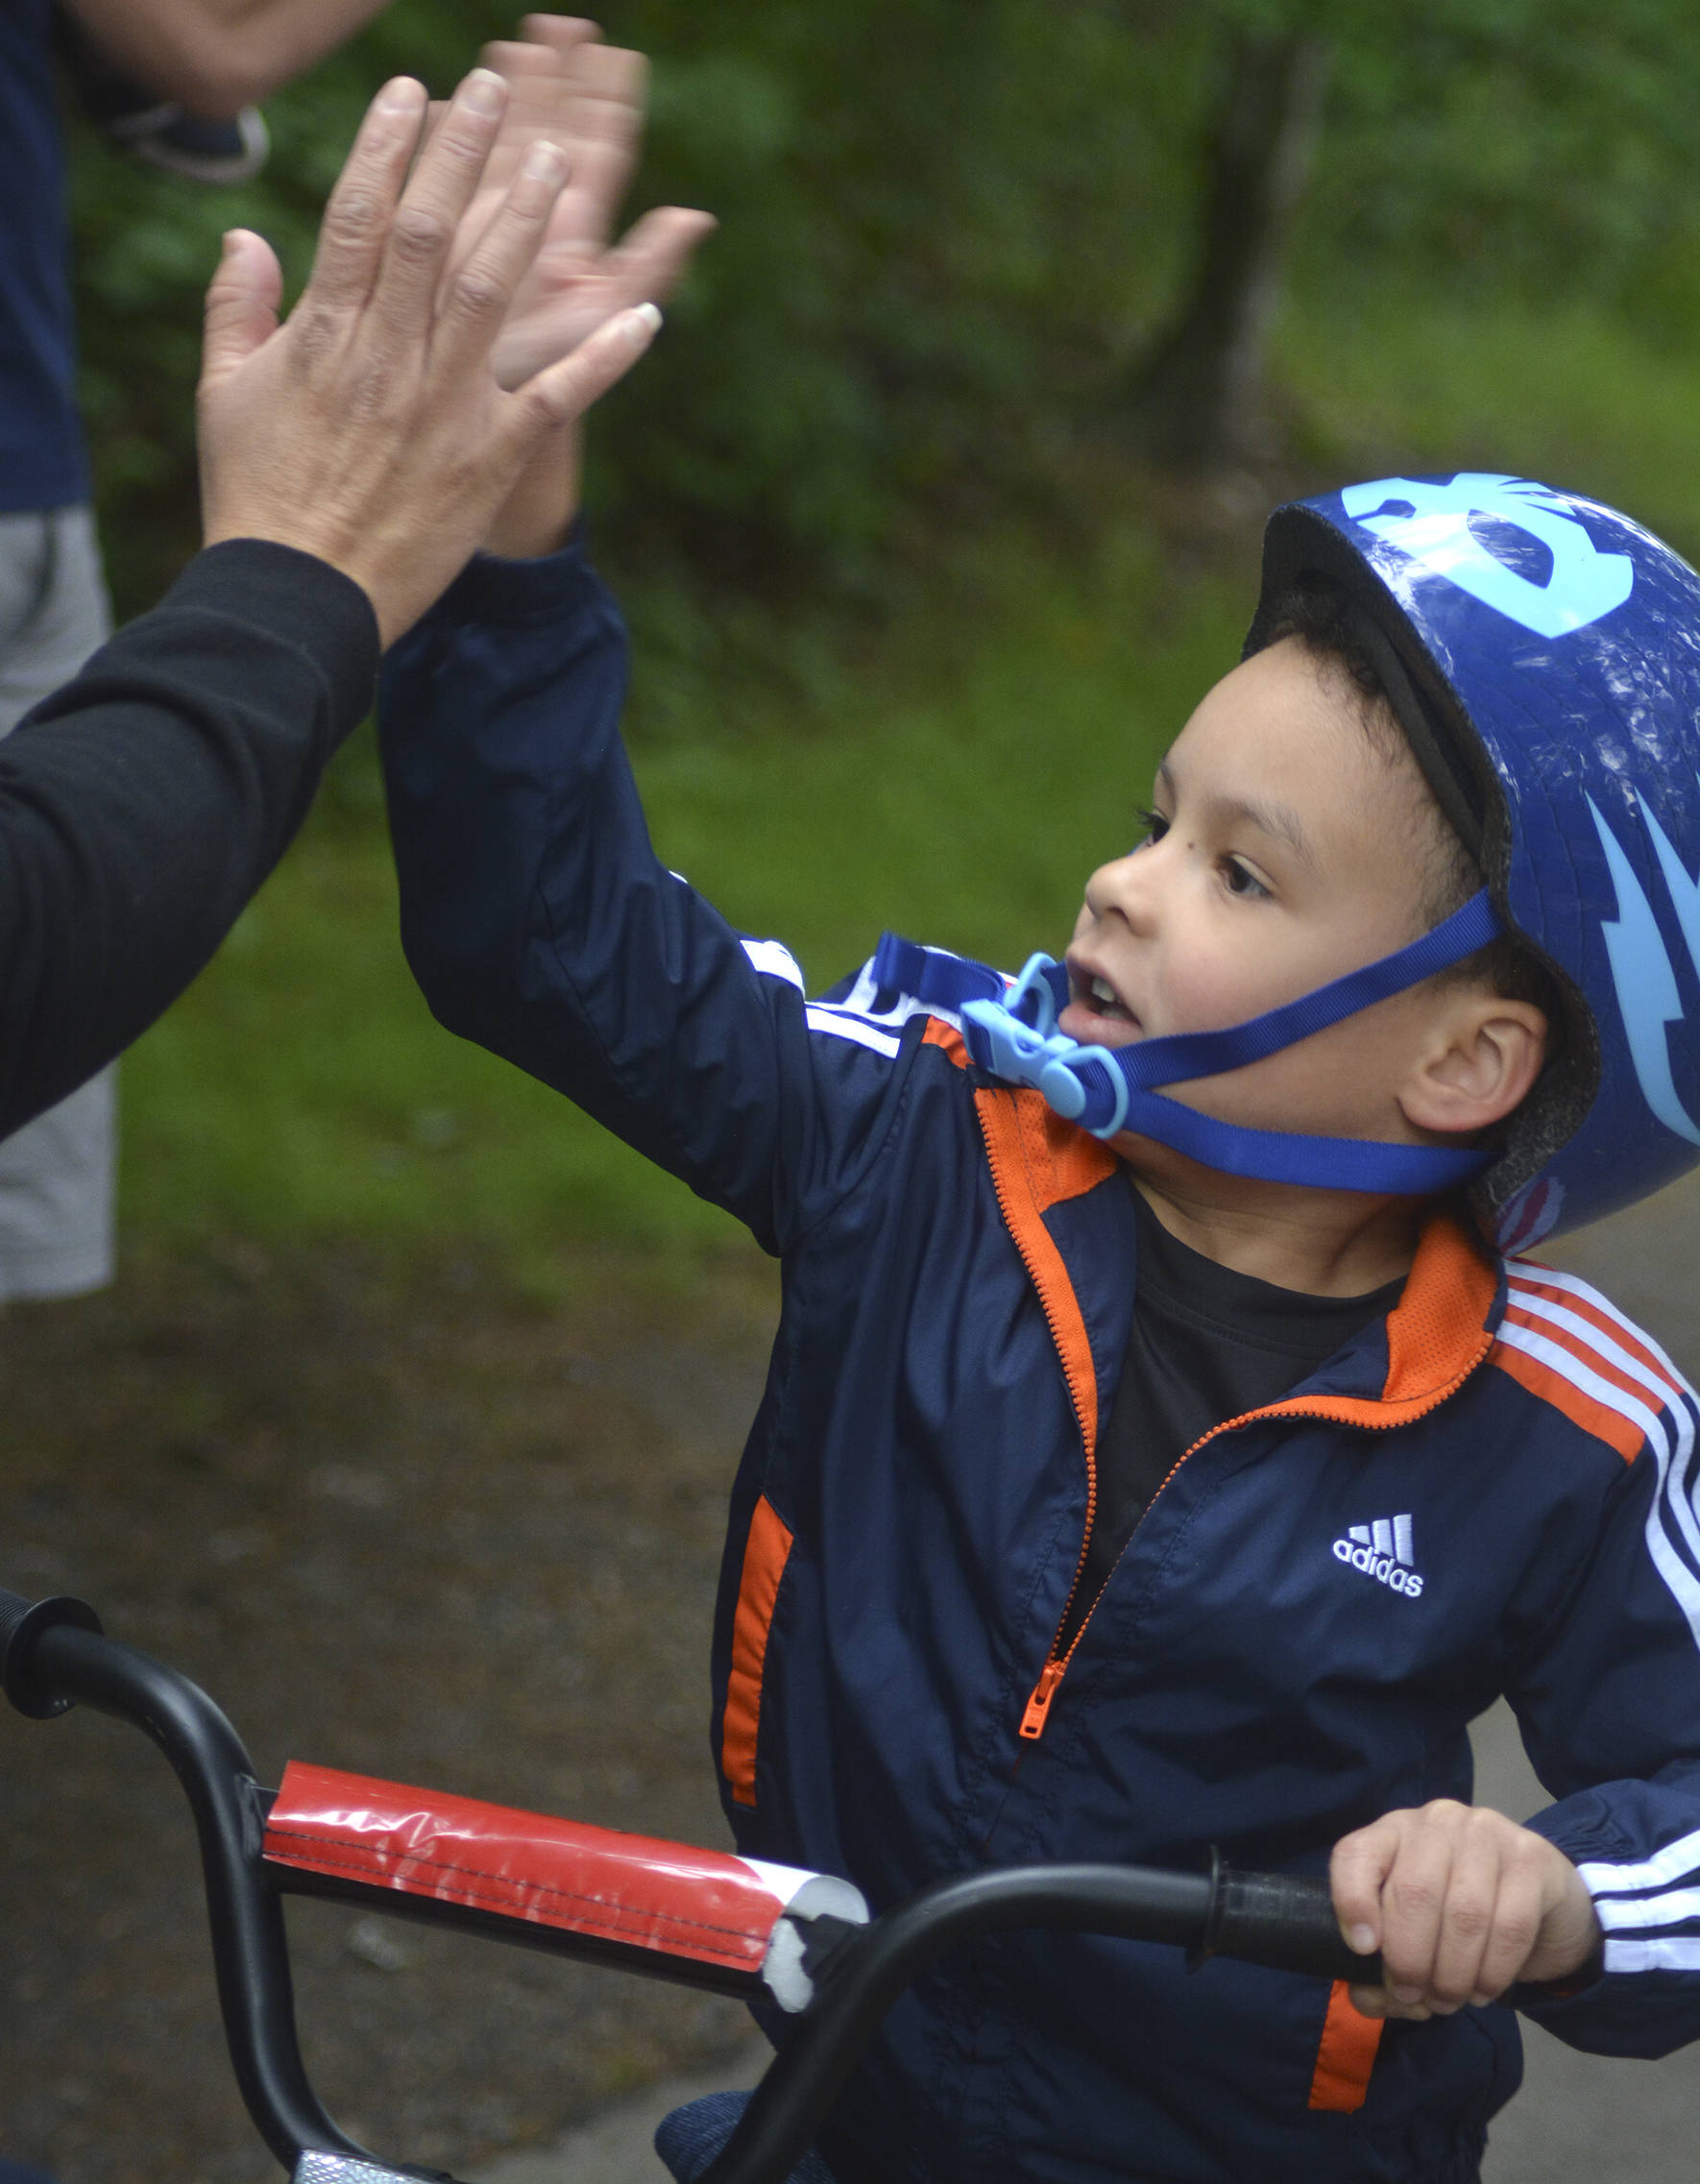 Photos by Kayse Angel                                 Kendri Larin rides to the finish line at the Maple Valley Bike Safety Rodeo and Bike Challenge that took place on June 22 at Lake Wilderness Park.